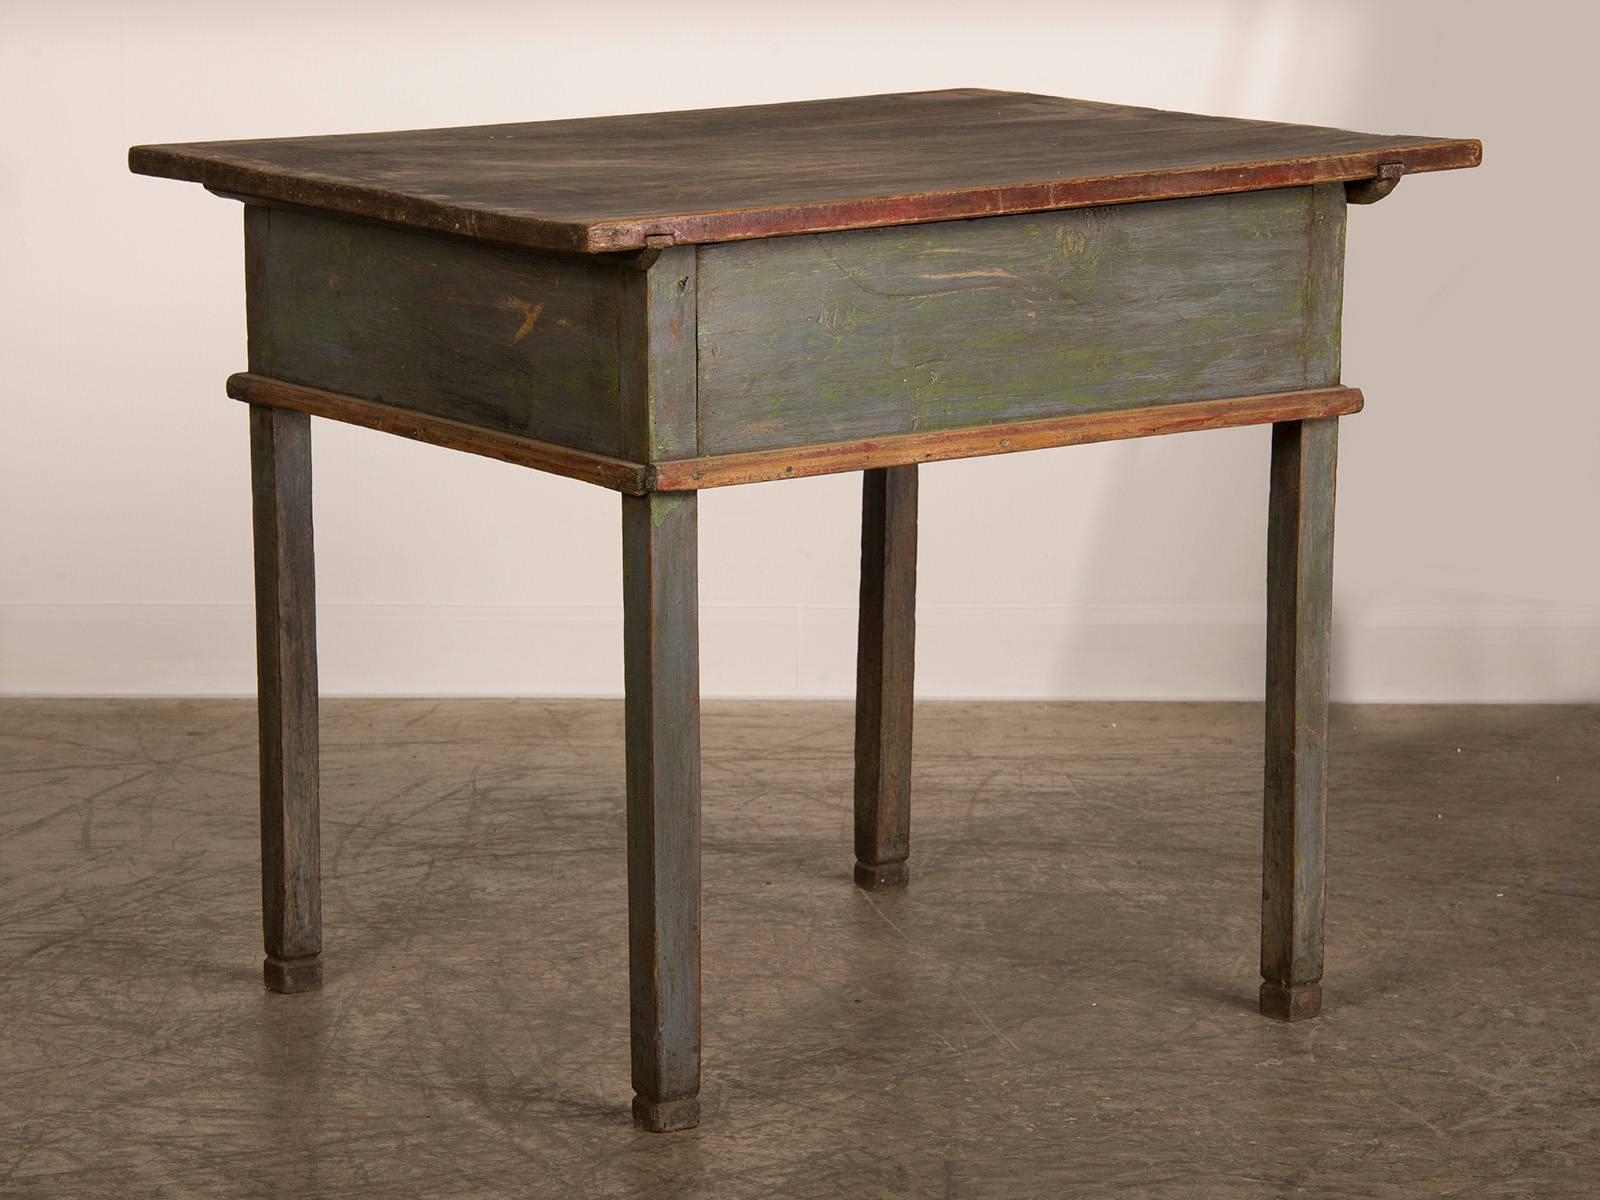 Antique Rustic German Painted Workbench or Writing Table, circa 1790 For Sale 2